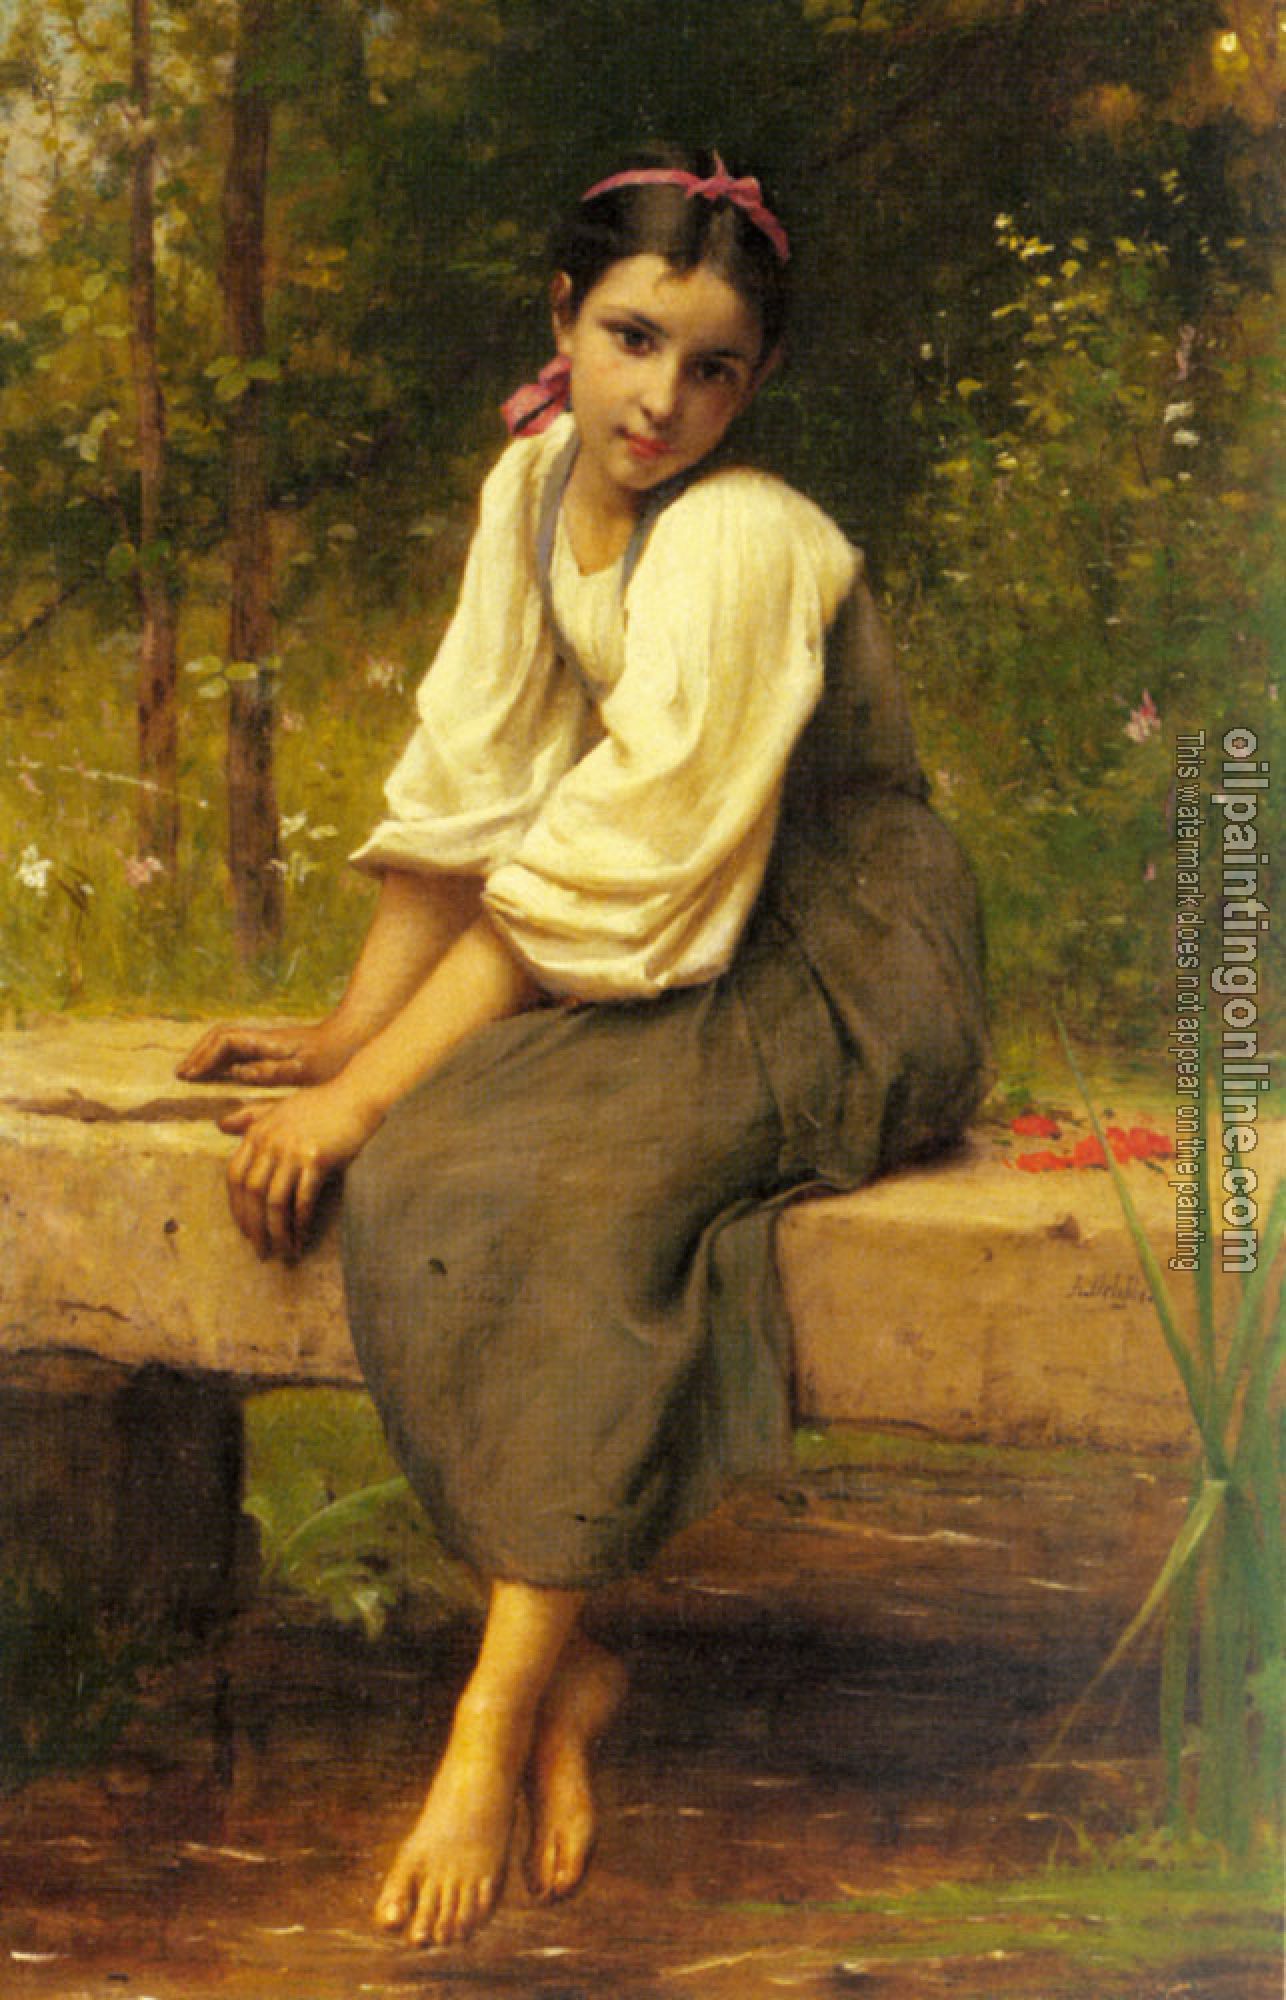 Delobbe, Francois Alfred - A Moment of Reflection